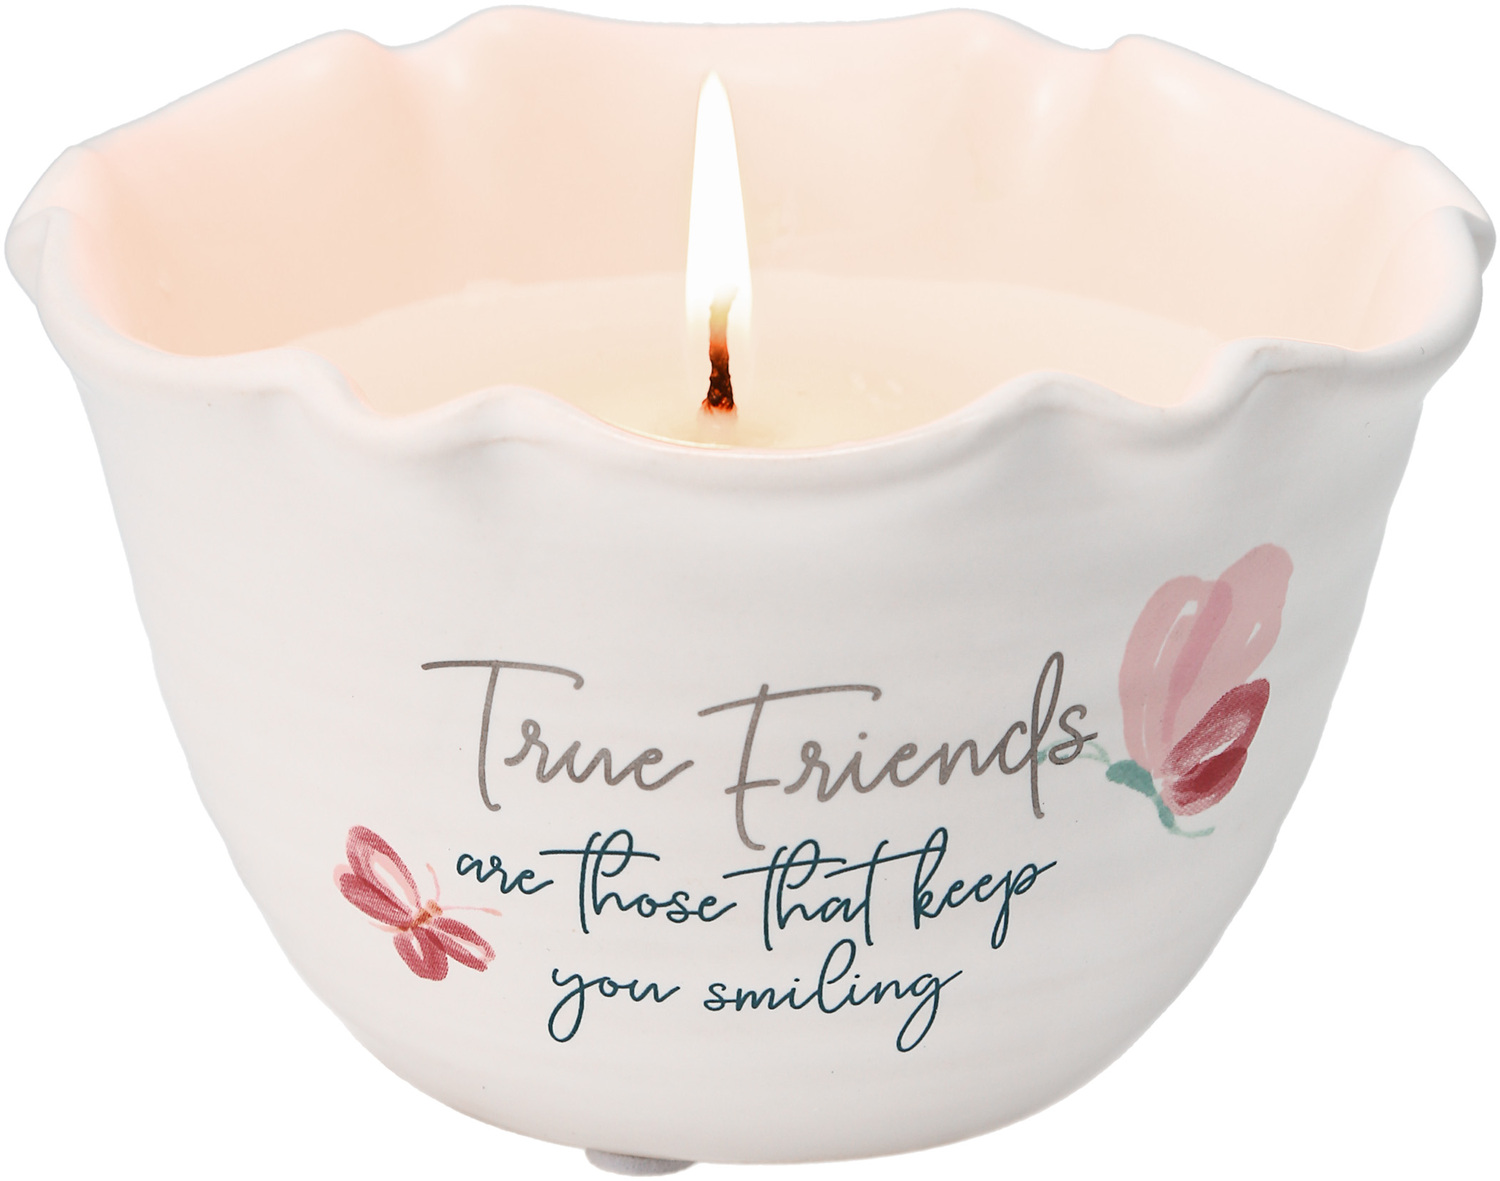 True Friends by Rosy Heart - True Friends - 9 oz - 100% Soy Wax Candle
Scent: Tranquility